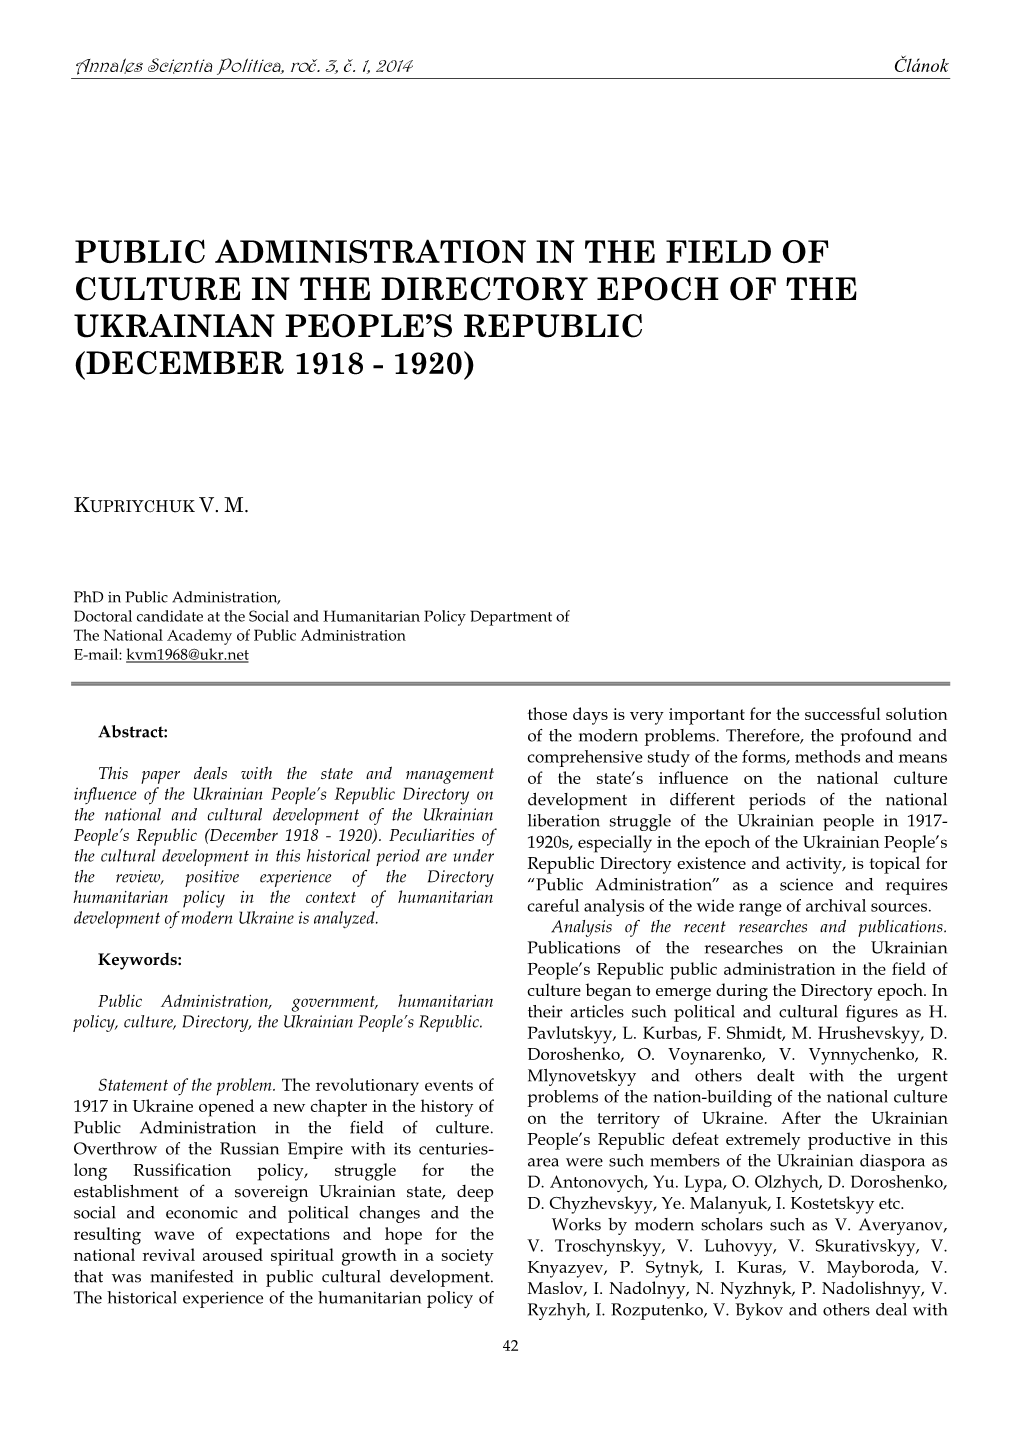 Public Administration in the Field of Culture in the Directory Epoch of the Ukrainian People’S Republic (December 1918 - 1920)